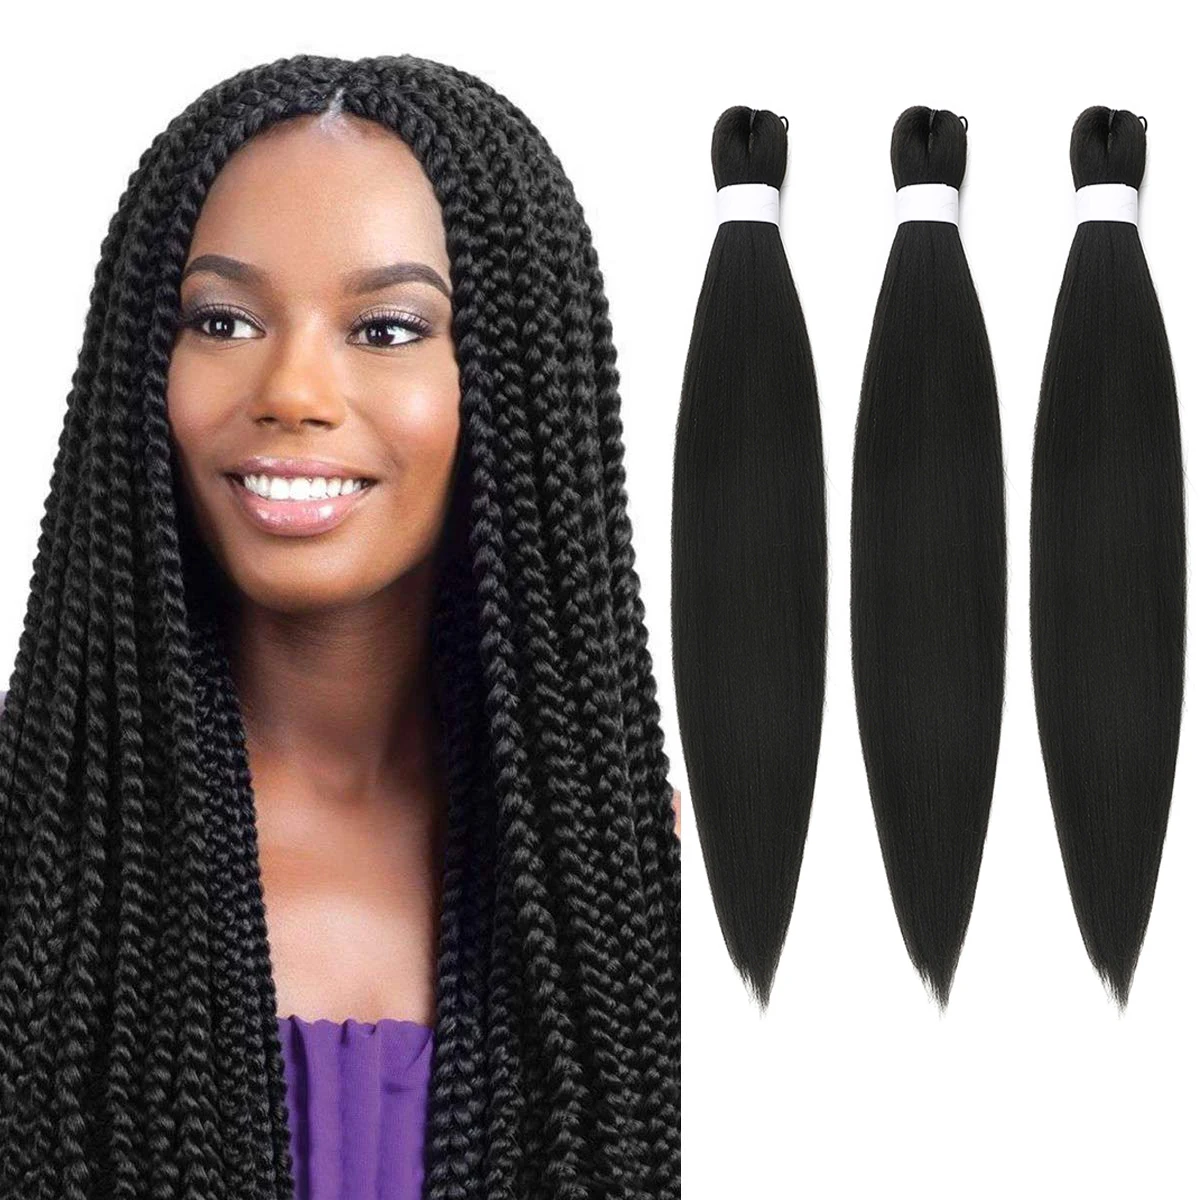 

Free Sample Extensions Crochet For African Expression Ombre Braids Easy Braid Pre Stretched Synthetic Braiding Hair